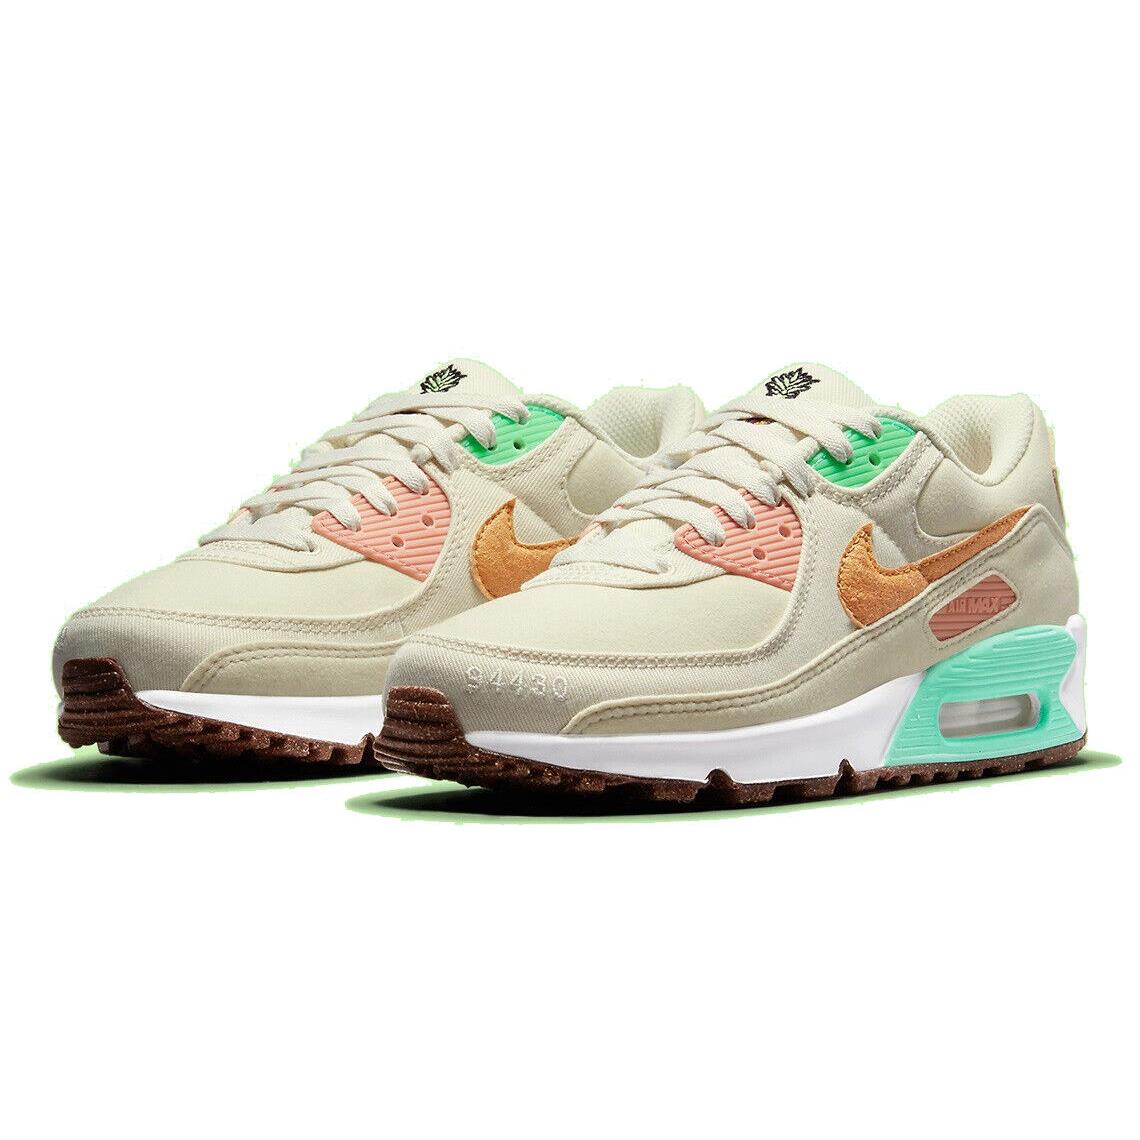 Nike Air Max 90 LX Womens Size 6 Sneaker Shoes DC5211 100 Happy Pineapple